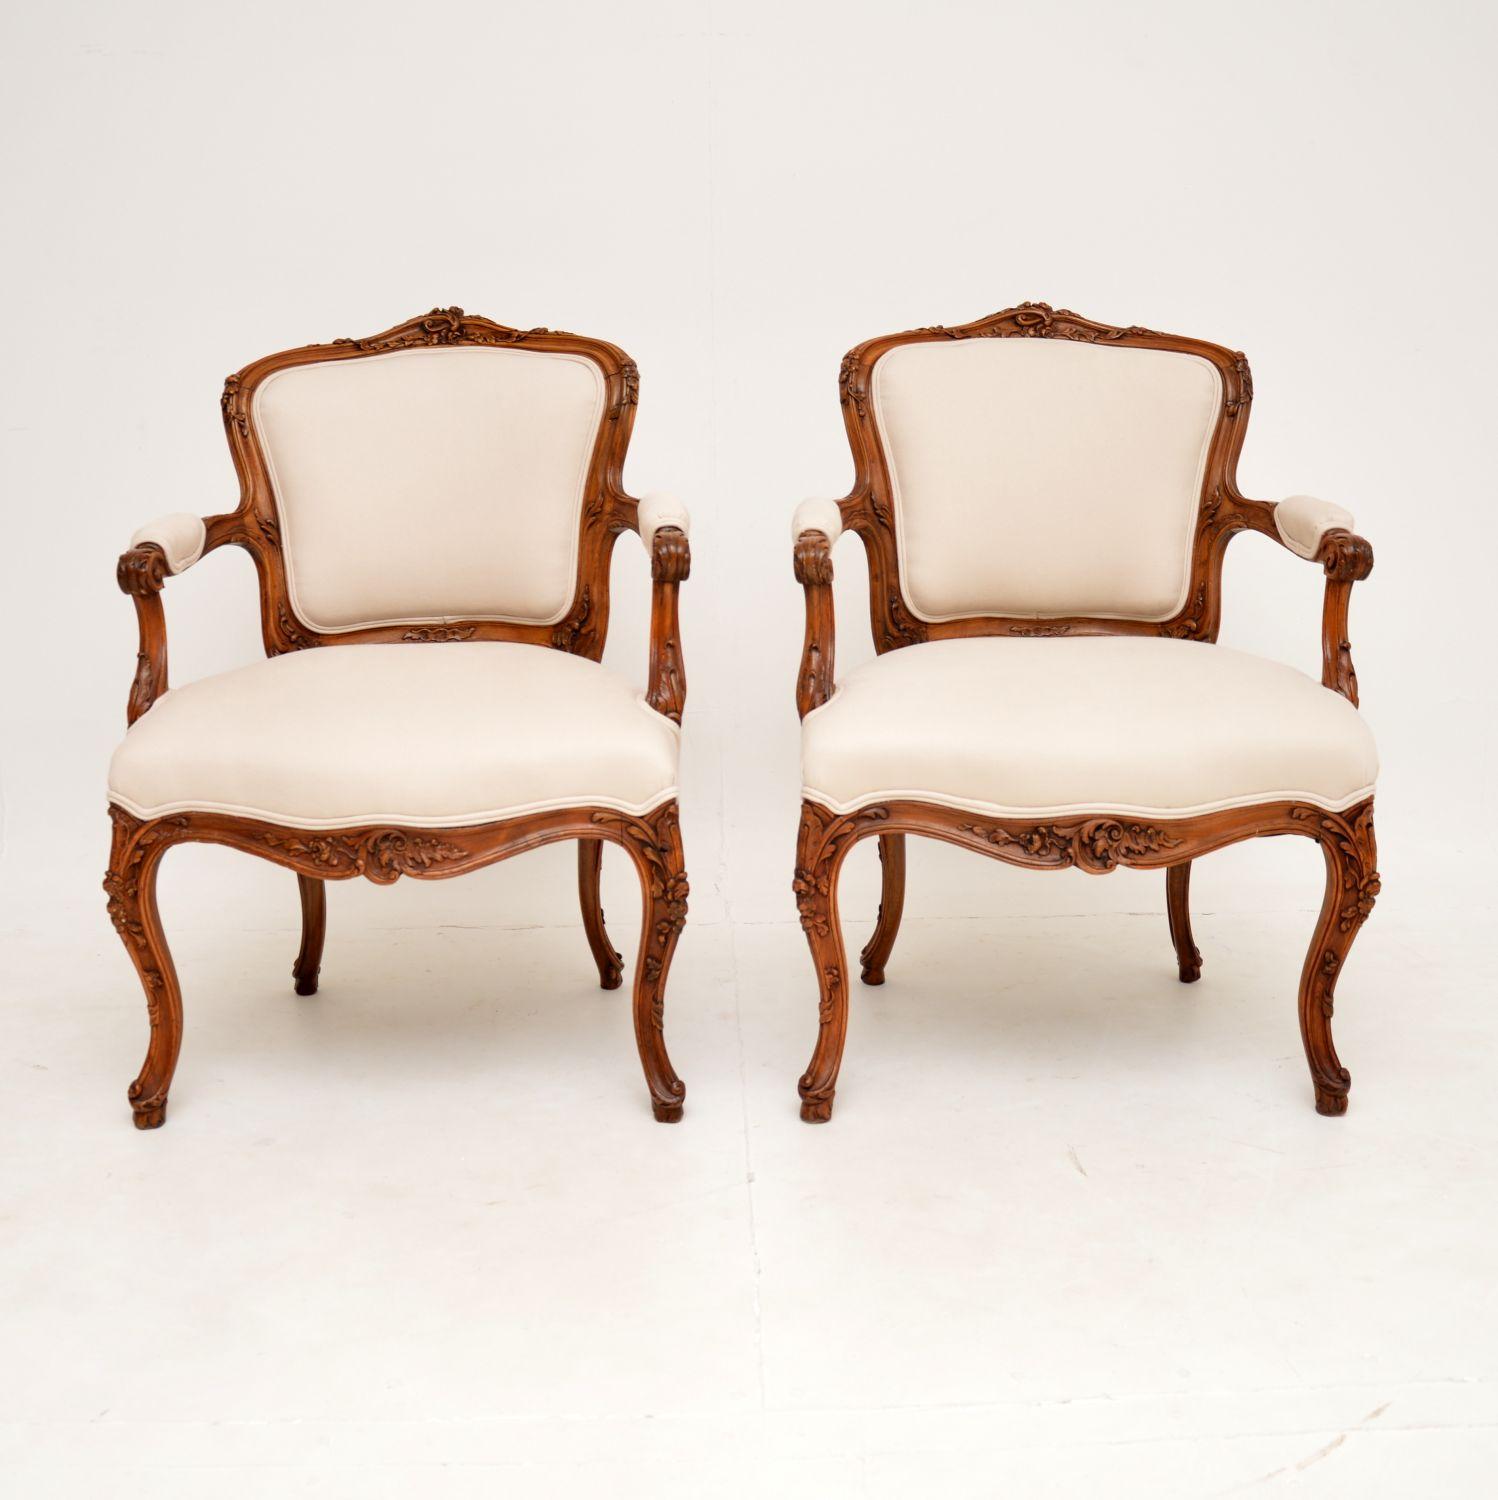 An incredible pair of antique French walnut salon armchairs with beautiful carvings. They were made in France, and I would date them from around the 1850-60’s period.

The quality is outstanding, with profuse, deep and intricate floral carving